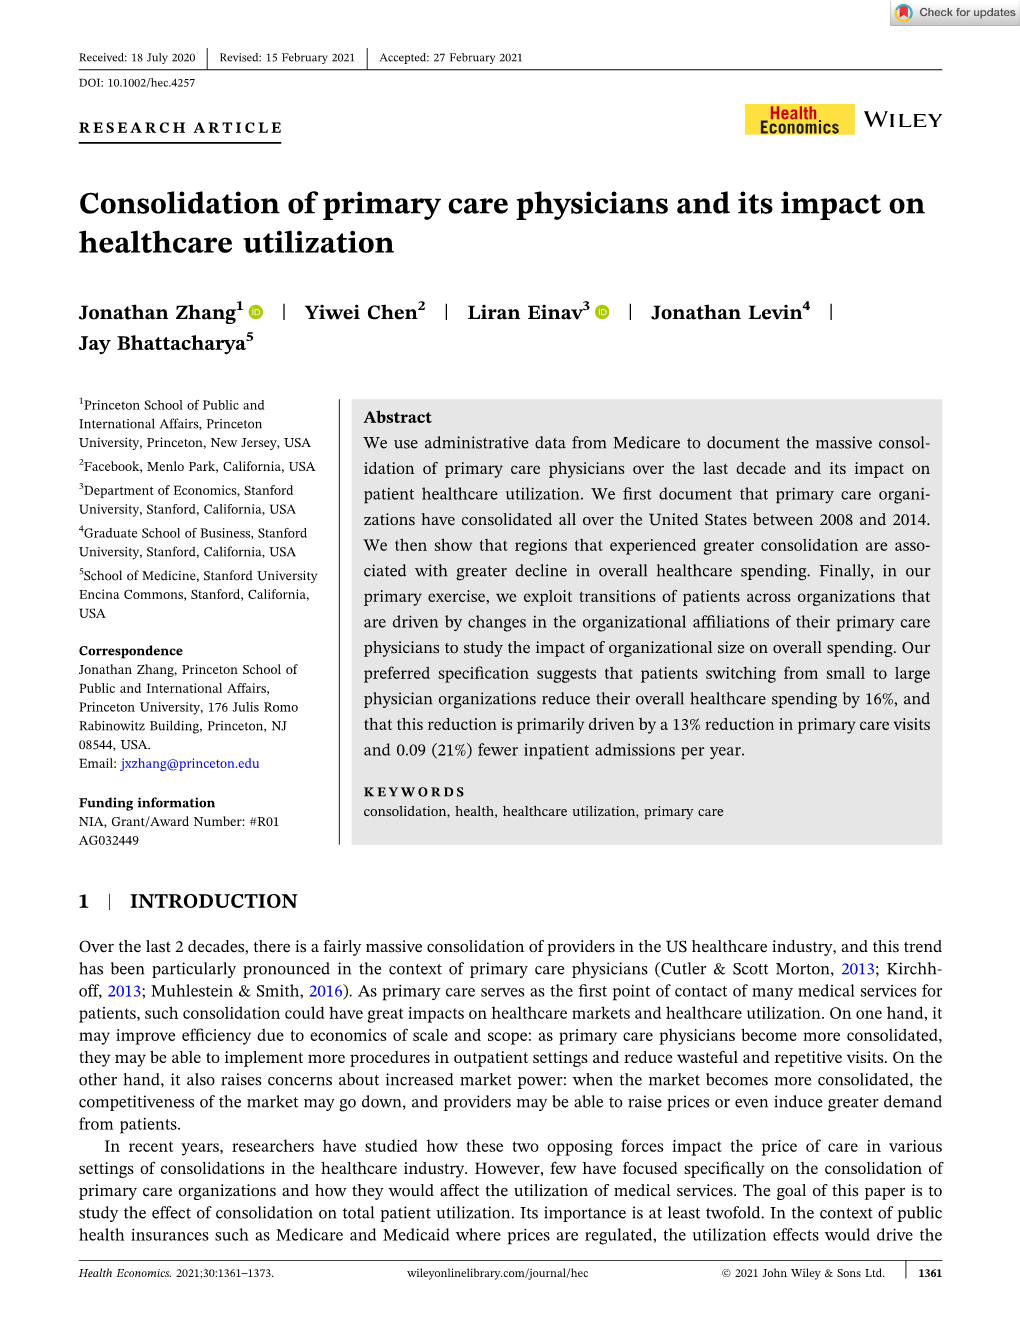 Consolidation of Primary Care Physicians and Its Impact on Healthcare Utilization